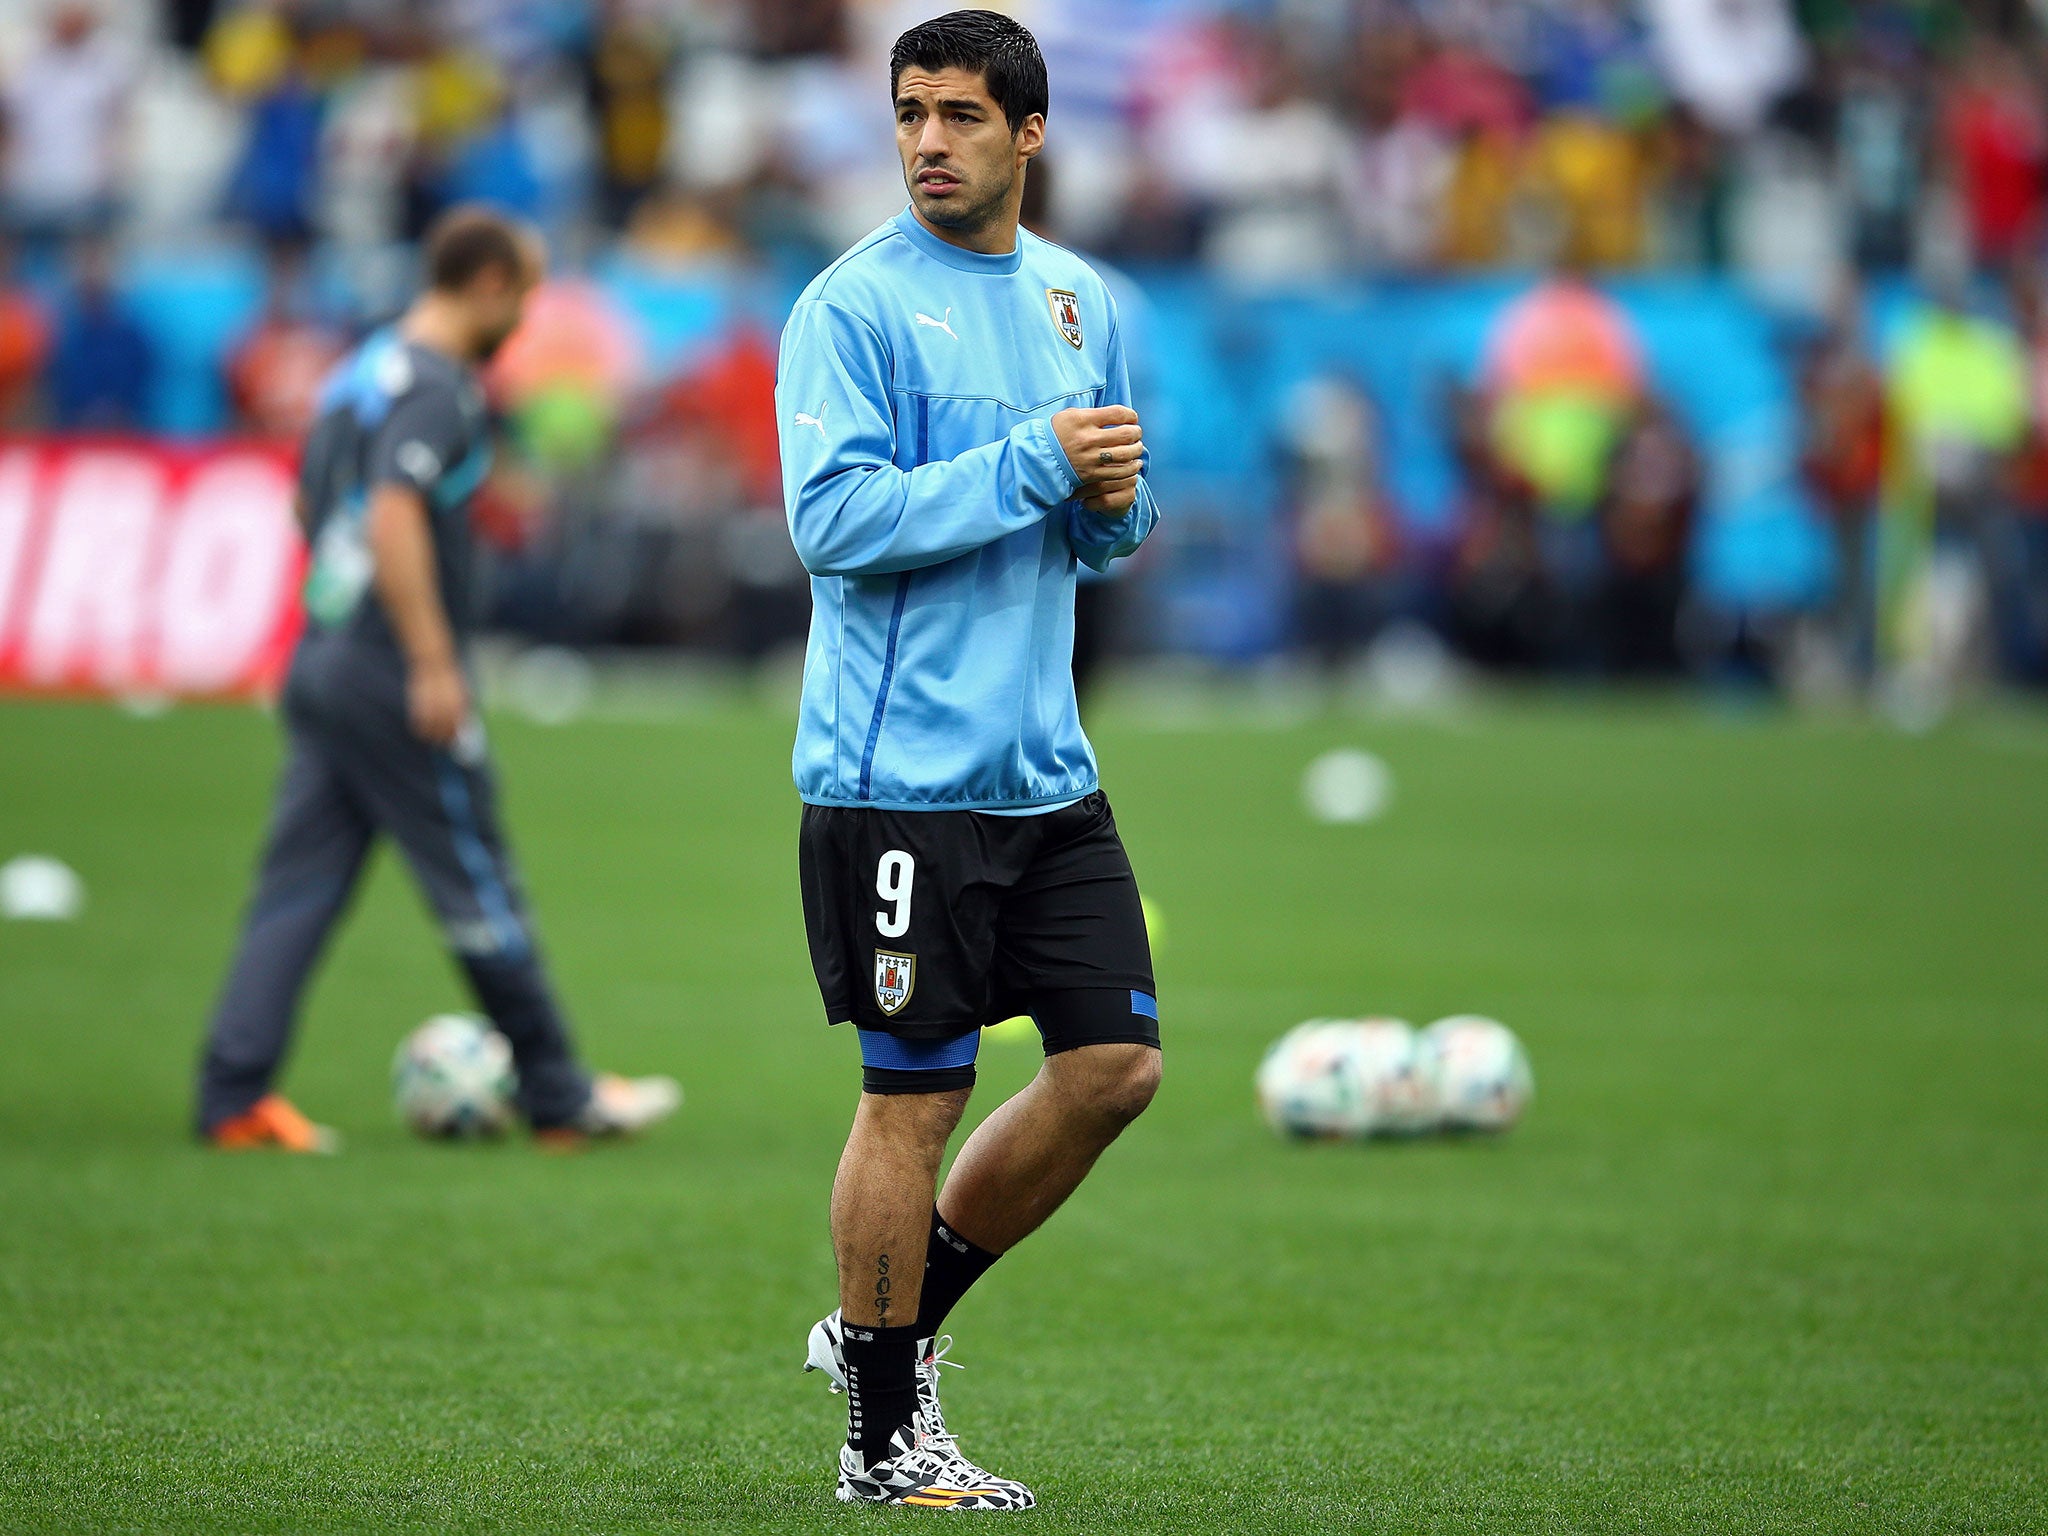 Luis Suarez was booed by England fans as he warmed up for the match